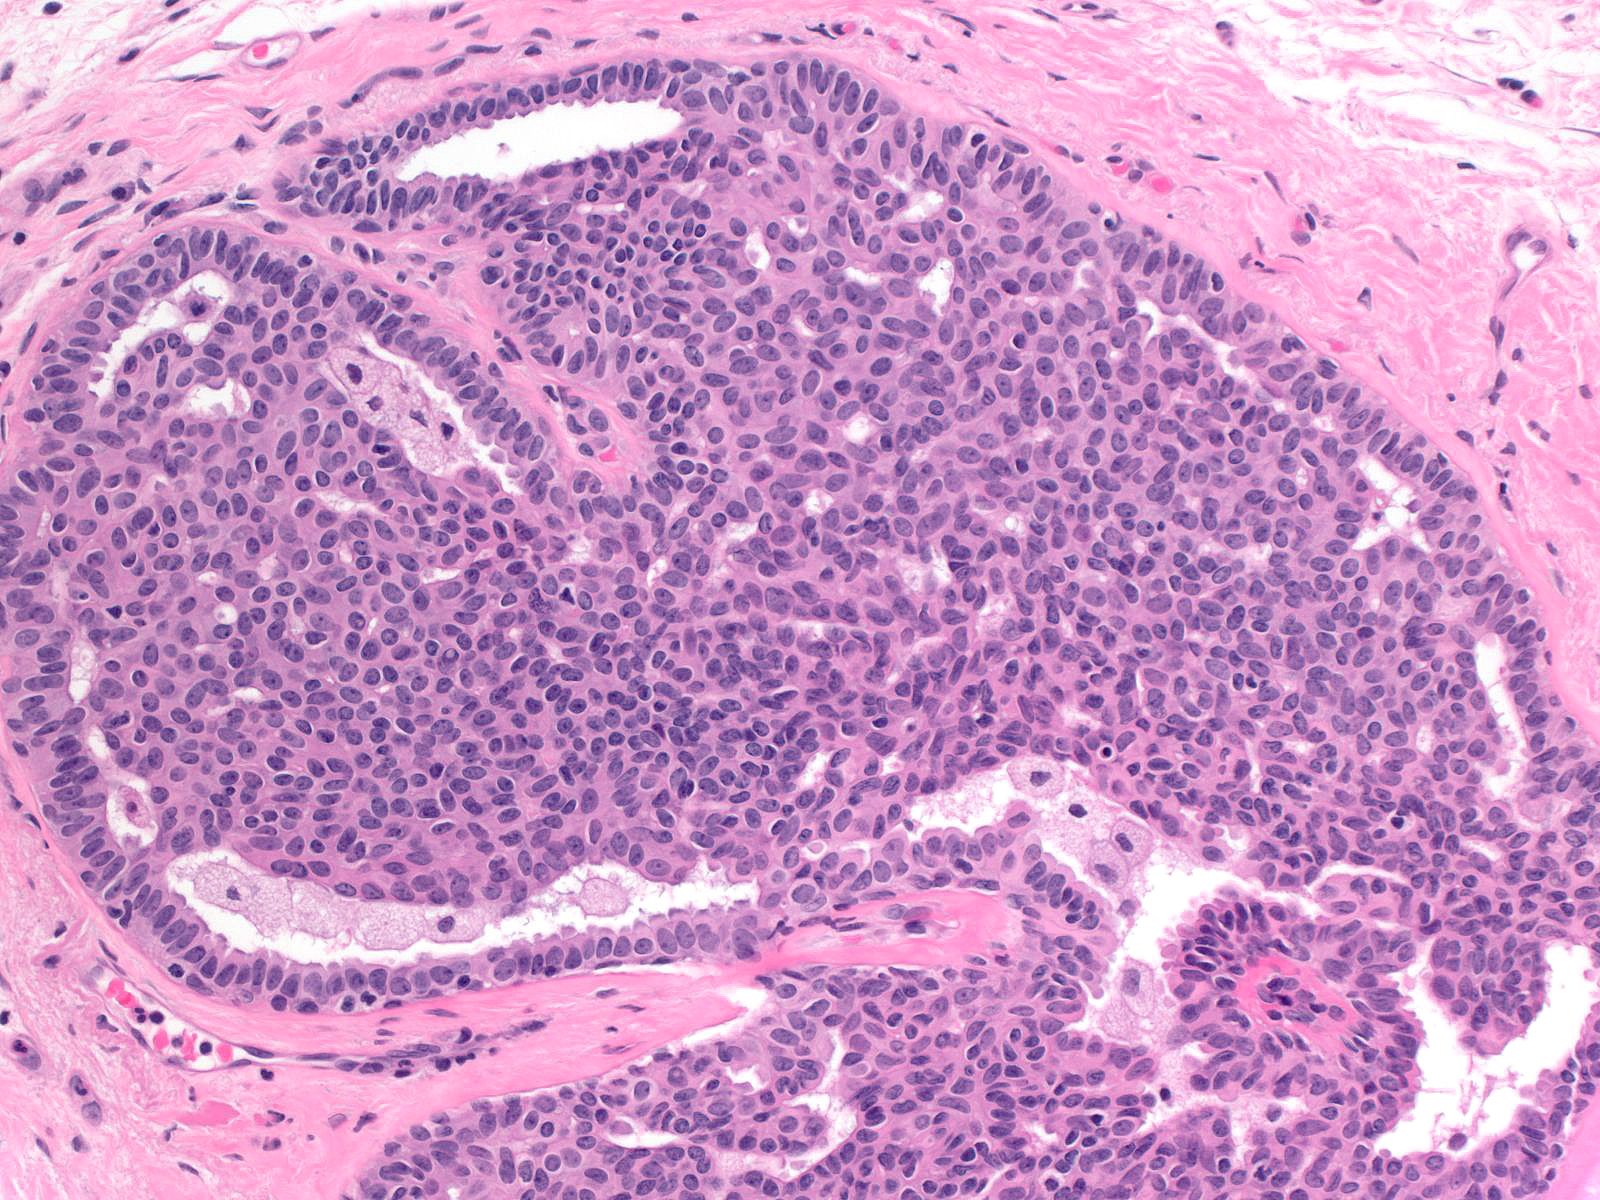 Intraductal papilloma with ductal hyperplasia Intraductal papilloma with florid hyperplasia